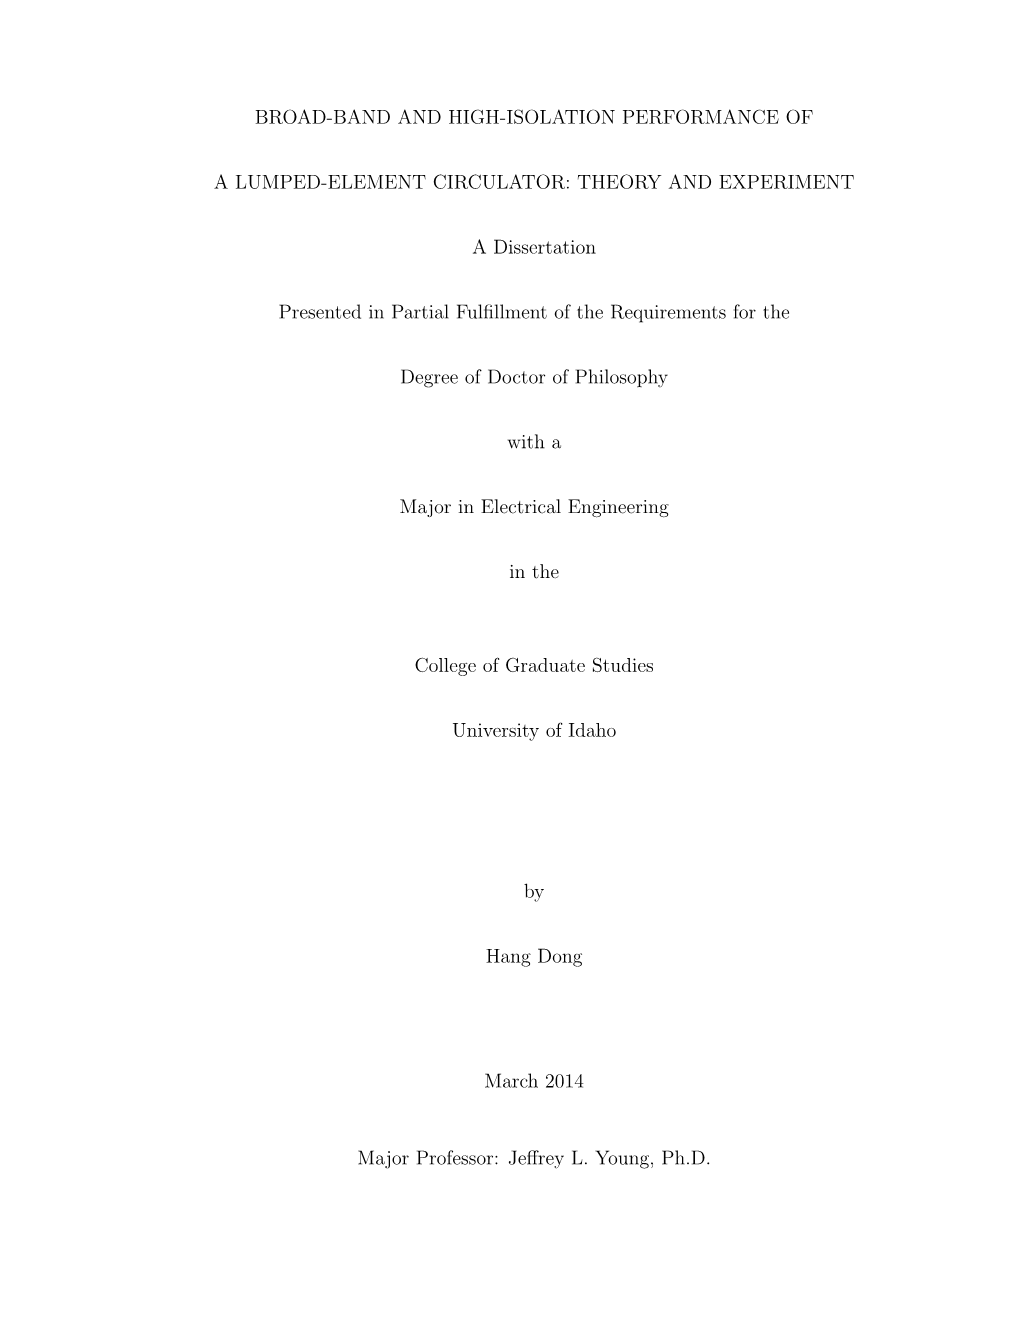 THEORY and EXPERIMENT a Dissertation Presented in Part